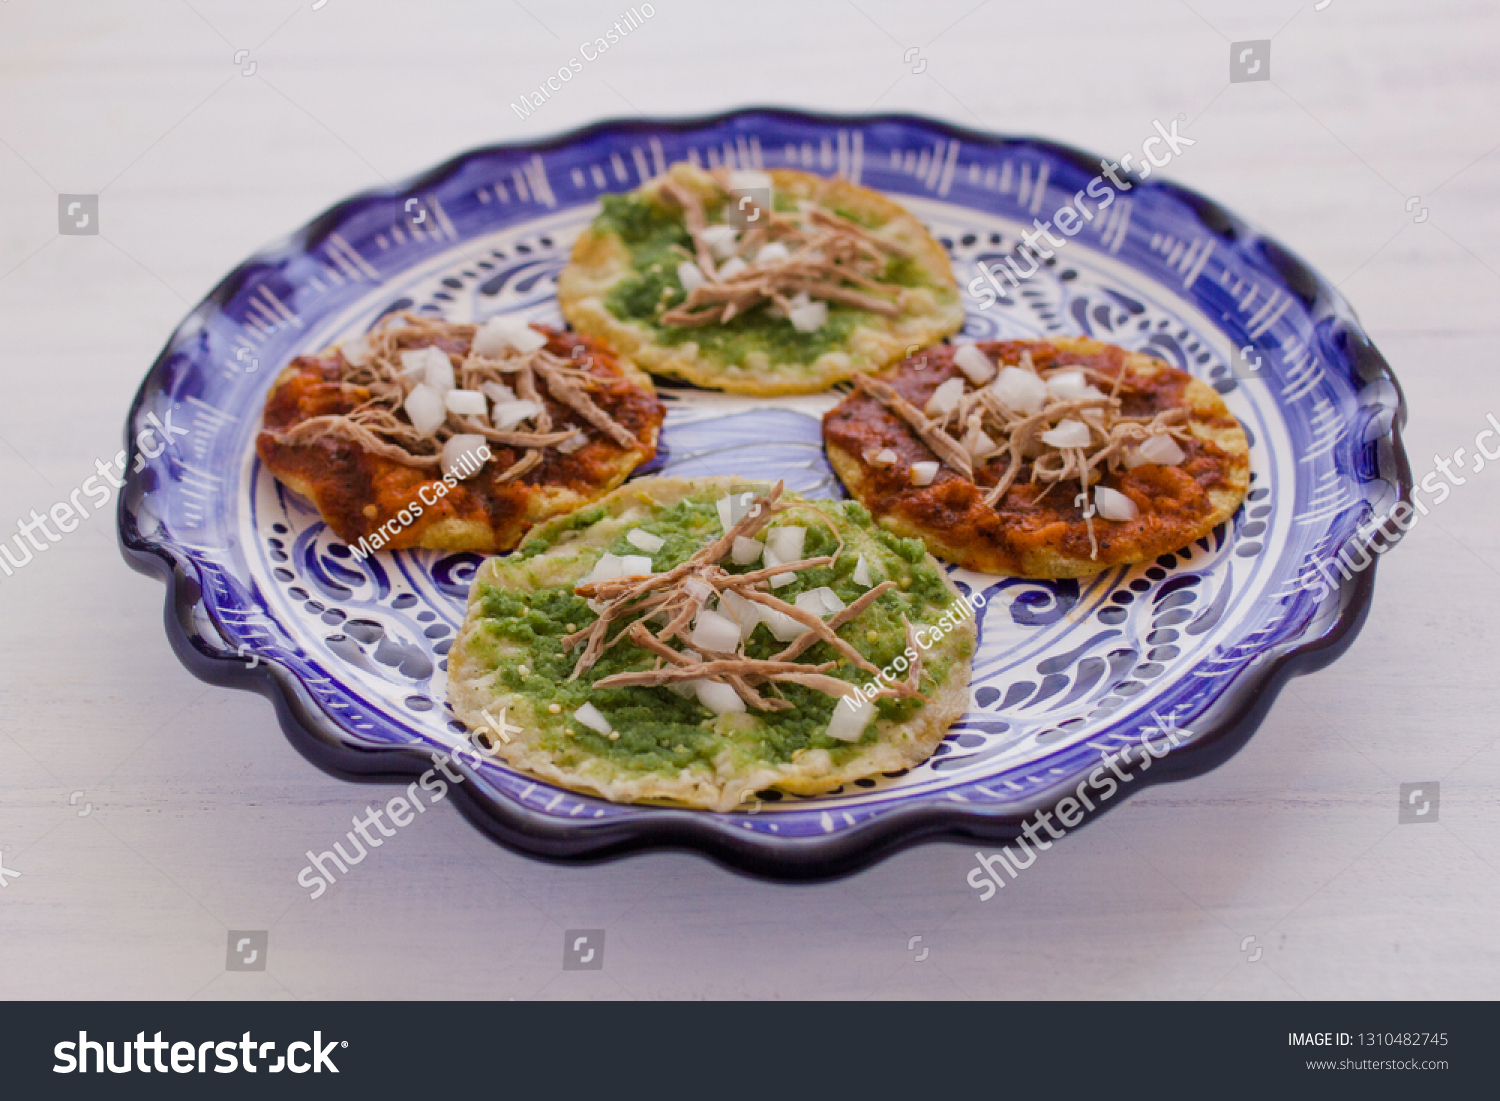 chalupas poblanas, mexican food Puebla Mexico on a white background #1310482745